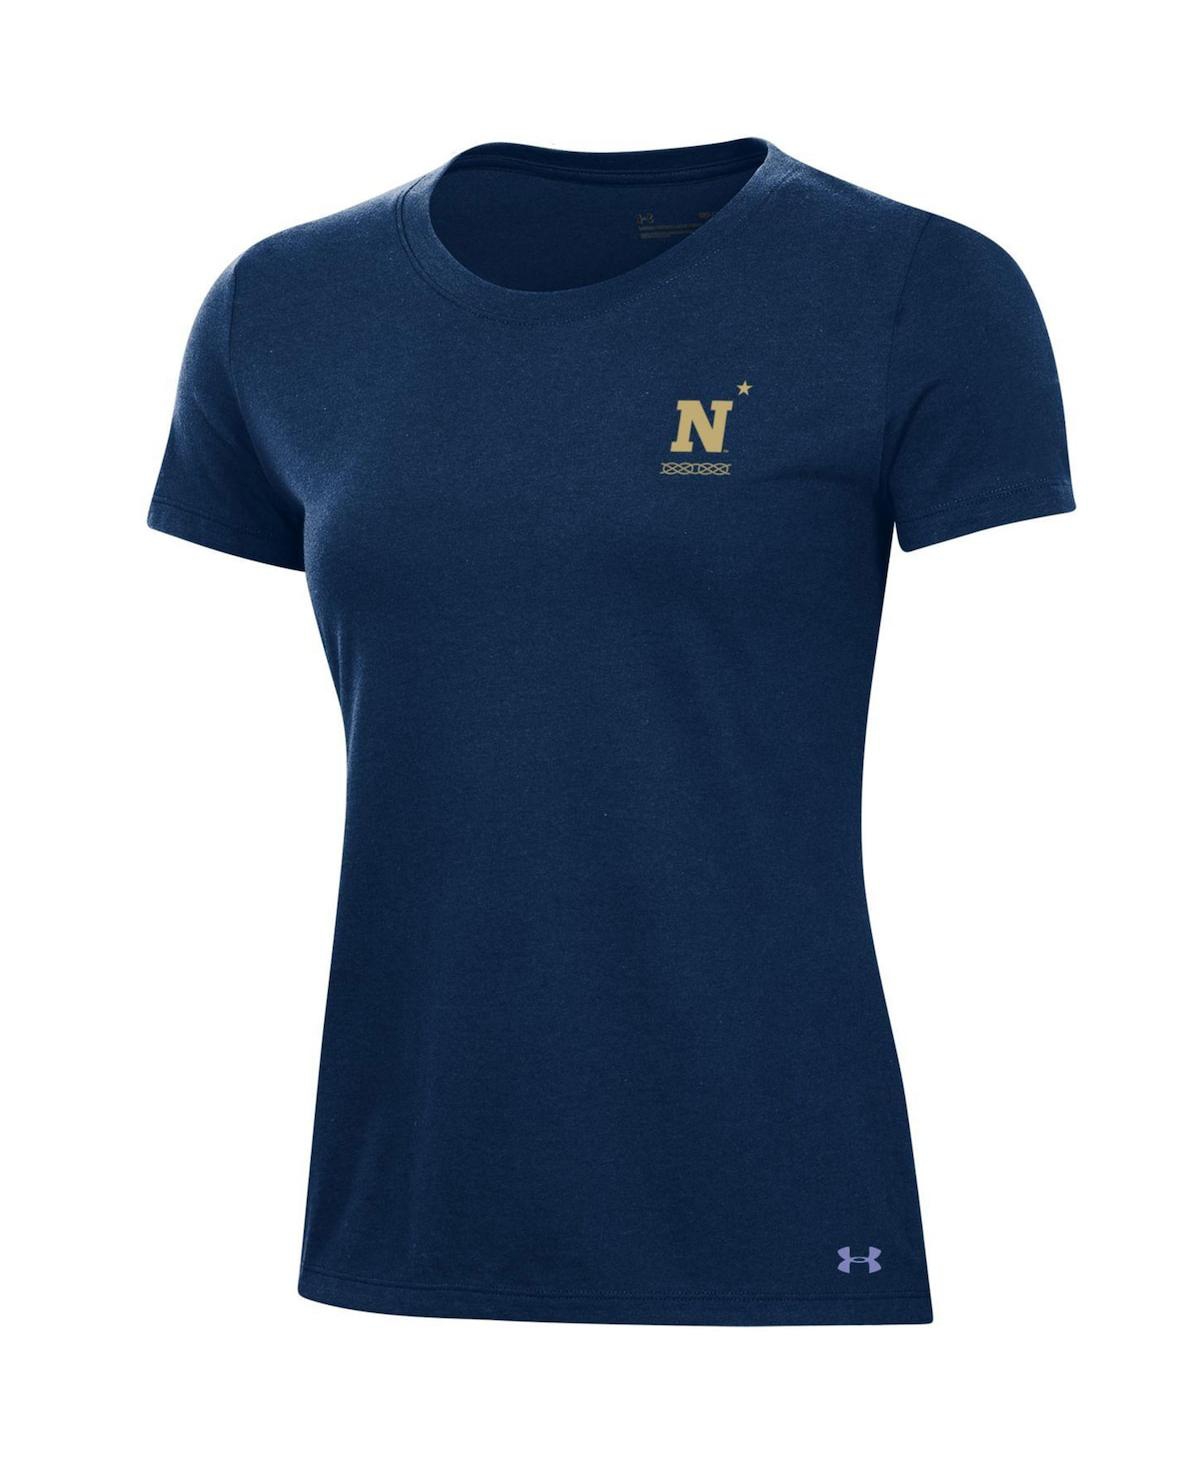 Shop Under Armour Women's  Navy Navy Midshipmen 2023 Aer Lingus College Football Classic Performance Cotto